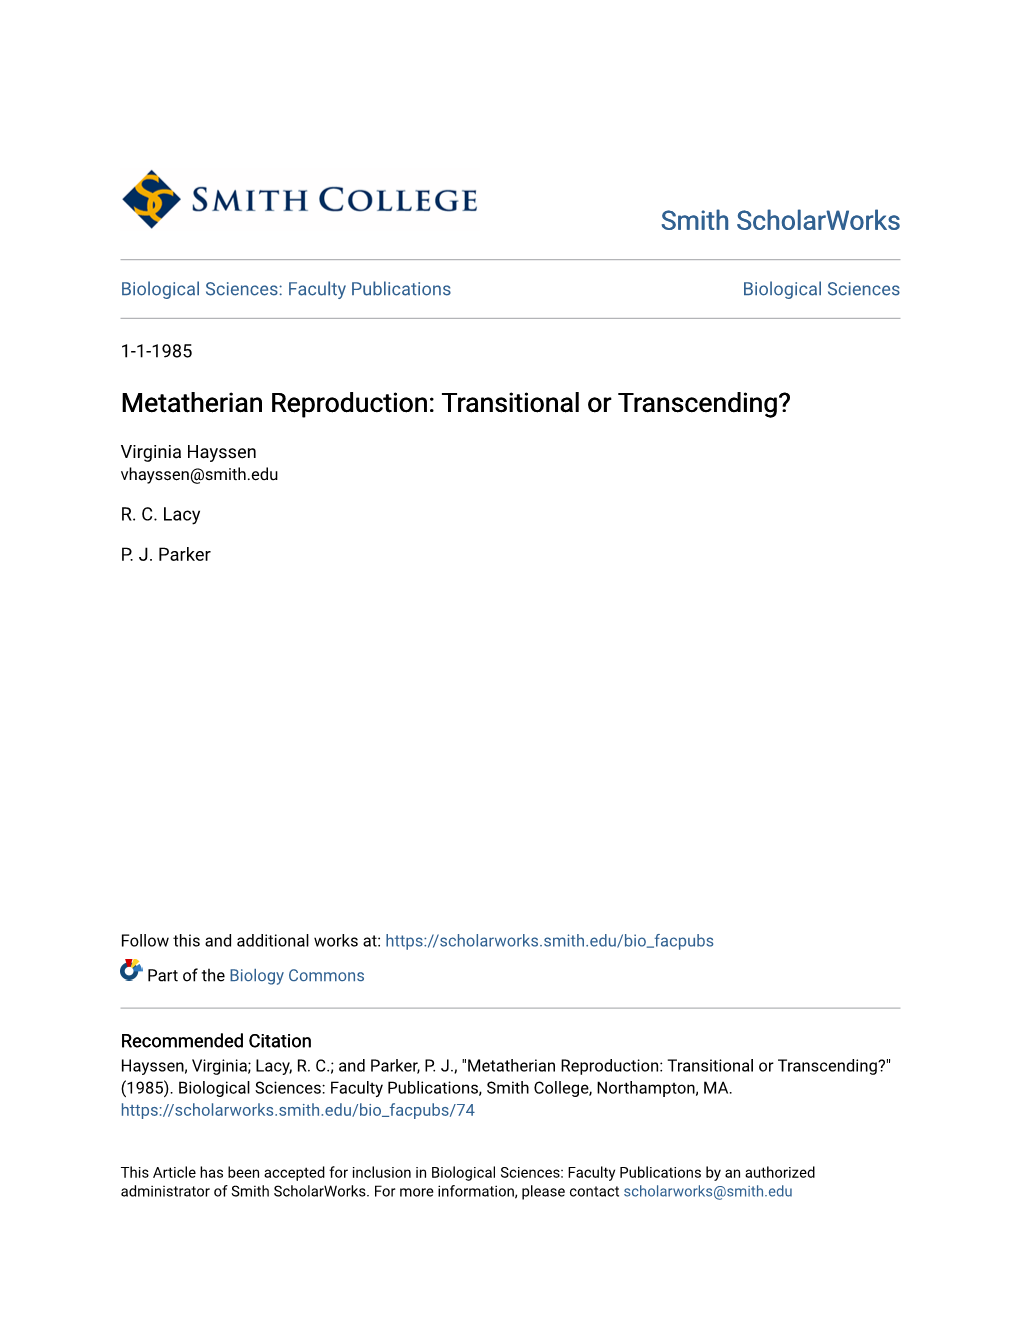 Metatherian Reproduction: Transitional Or Transcending?